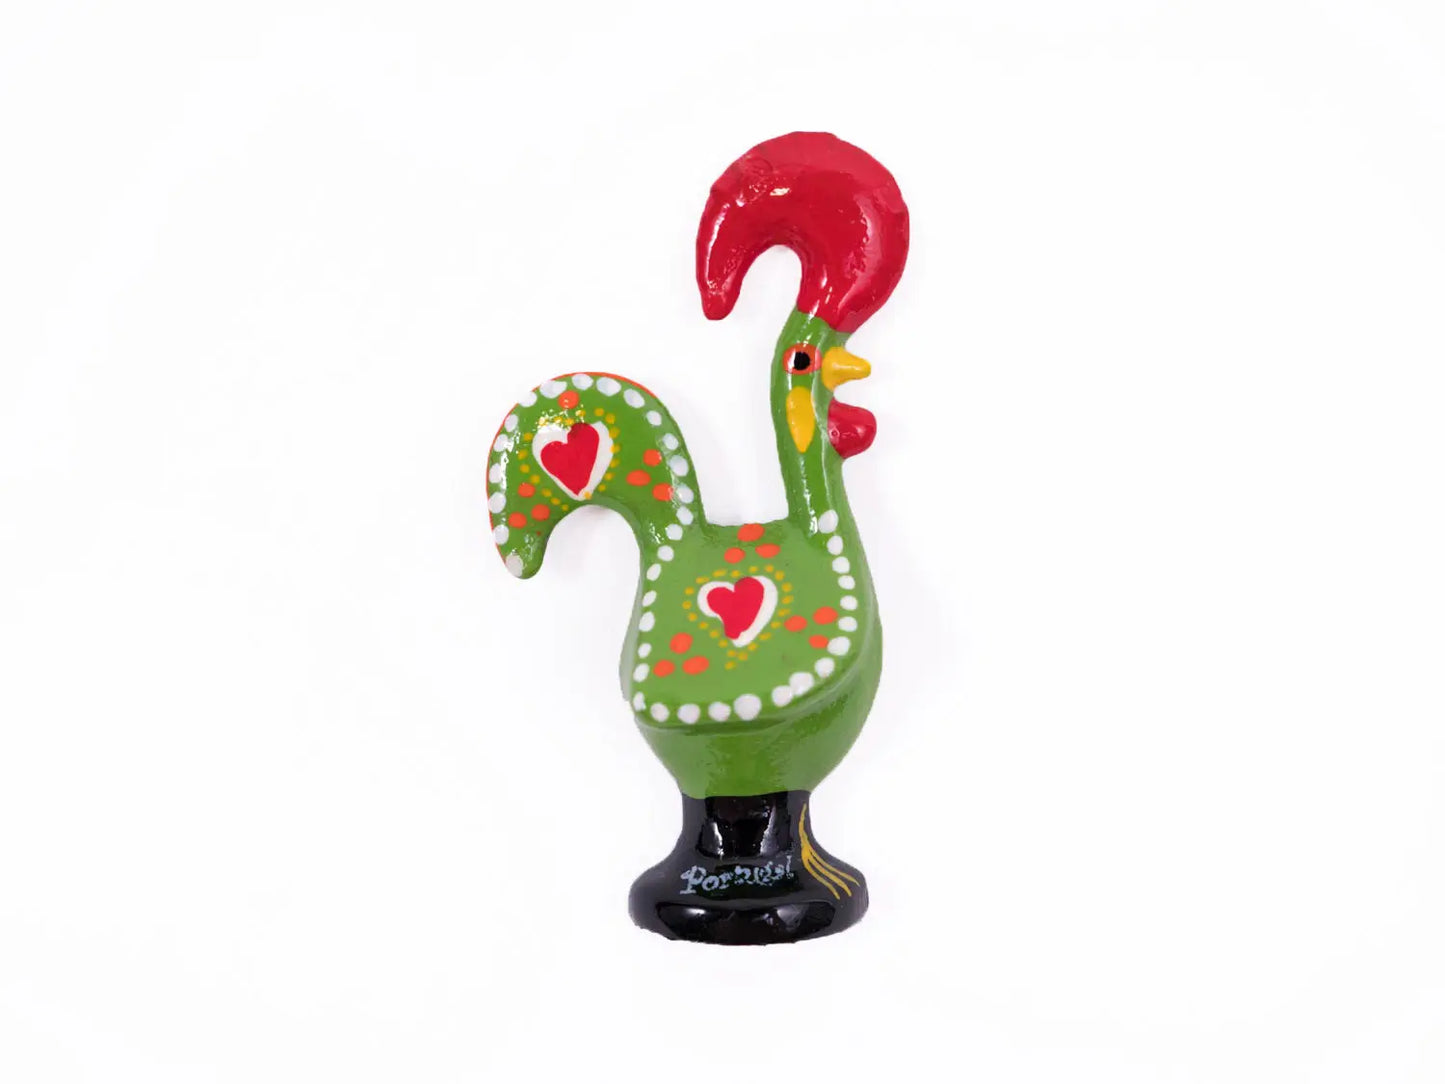 Portuguese Inspired Barcelos Rooster Magnet in Green-Rooster Camisa